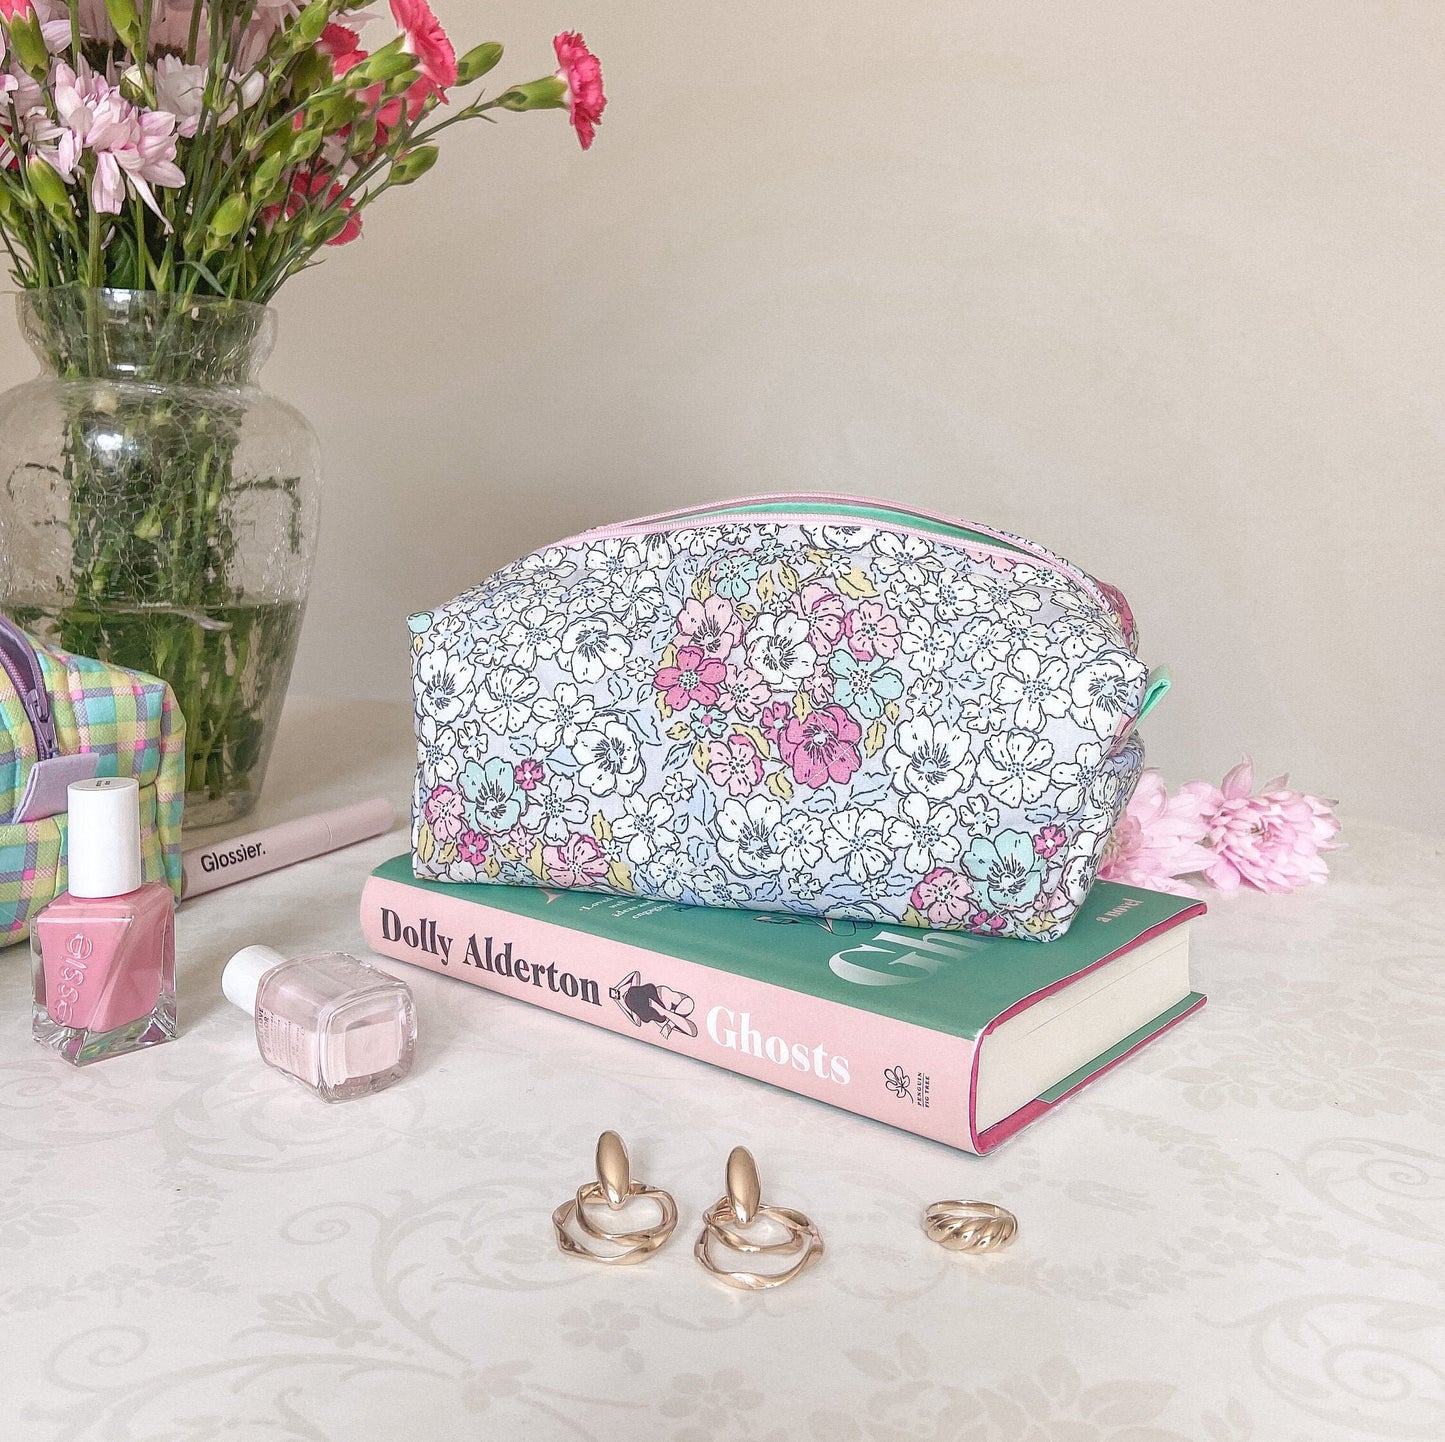 PASTEL MAKEUP BAG medium pink blue floral quilted cosmetic bag lined with mint green, cotton zip-up pouch, make-up bag handmade in U.K.